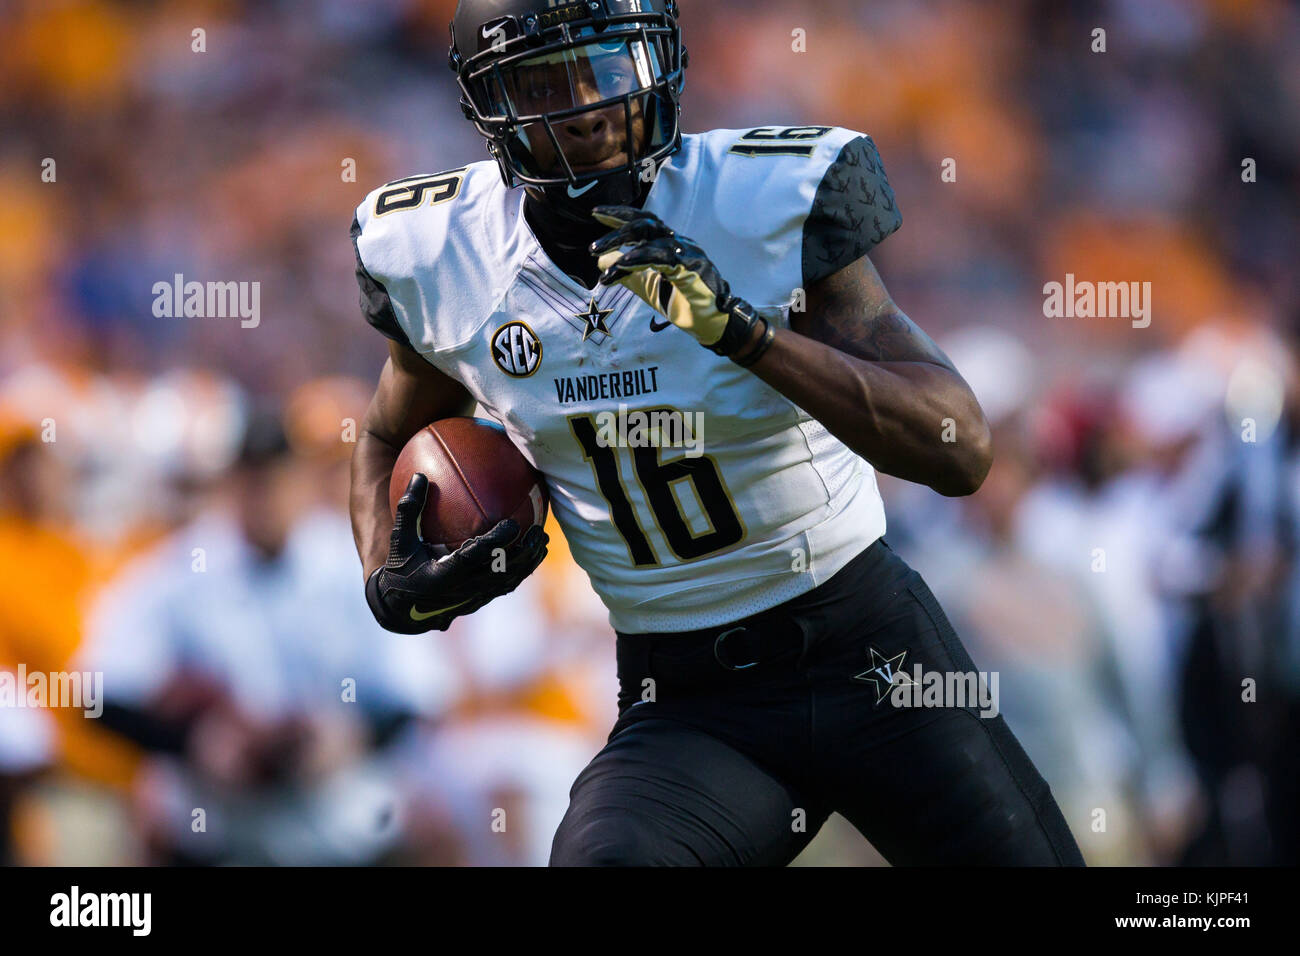 November 25, 2017: wide receiver Kalija Lipscomb #16 of the Vanderbilt Commodores catches a touchdown pass during the NCAA Football game between the University of Tennessee Volunteers and the Vanderbilt University Commodores at Neyland Stadium in Knoxville, TN Tim Gangloff/CSM Credit: Cal Sport Media/Alamy Live News Stock Photo